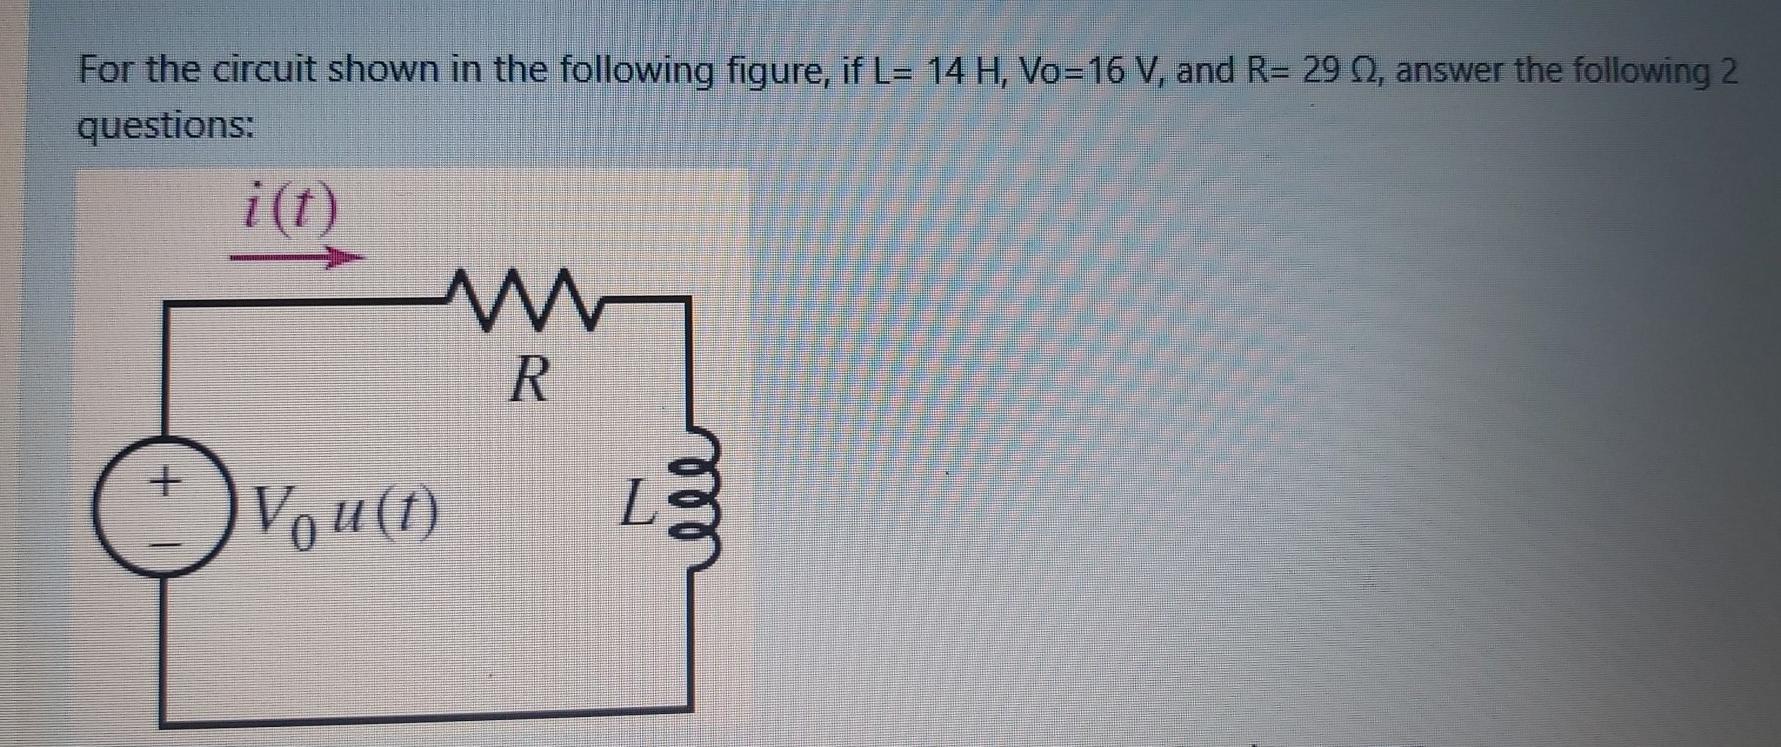 For the circuit shown in the following figure, if L= 14 H, Vo=16 V, and R= 29 , answer the following 2 questions: i(t) w R. +